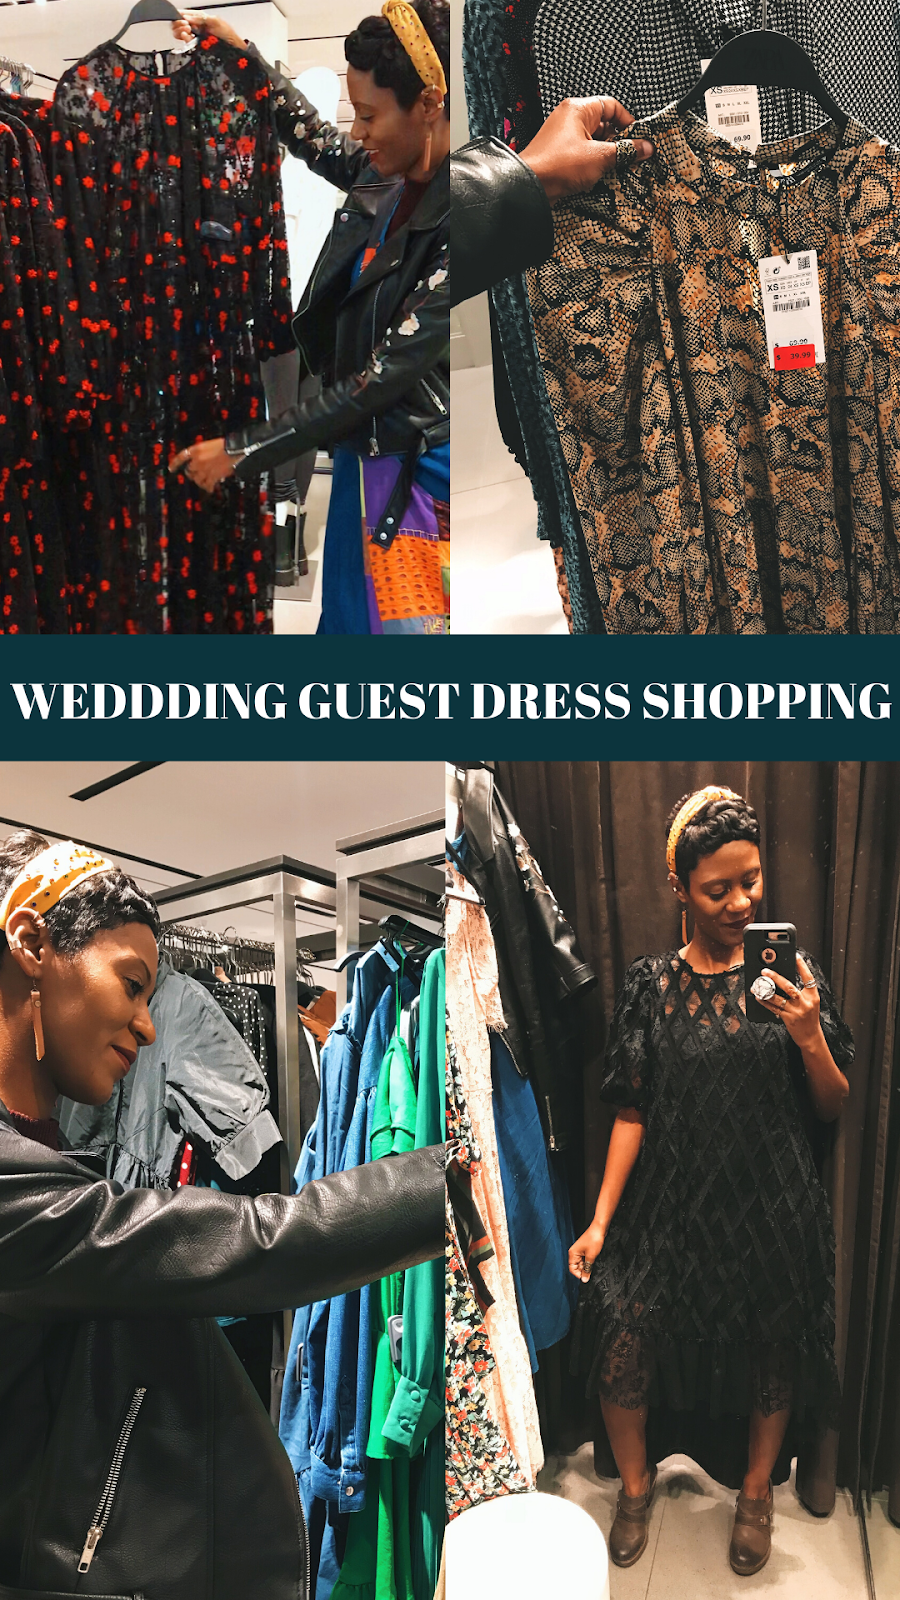 Come Wedding Guest Shopping With Me: Trying To Find The Perfect Dress!